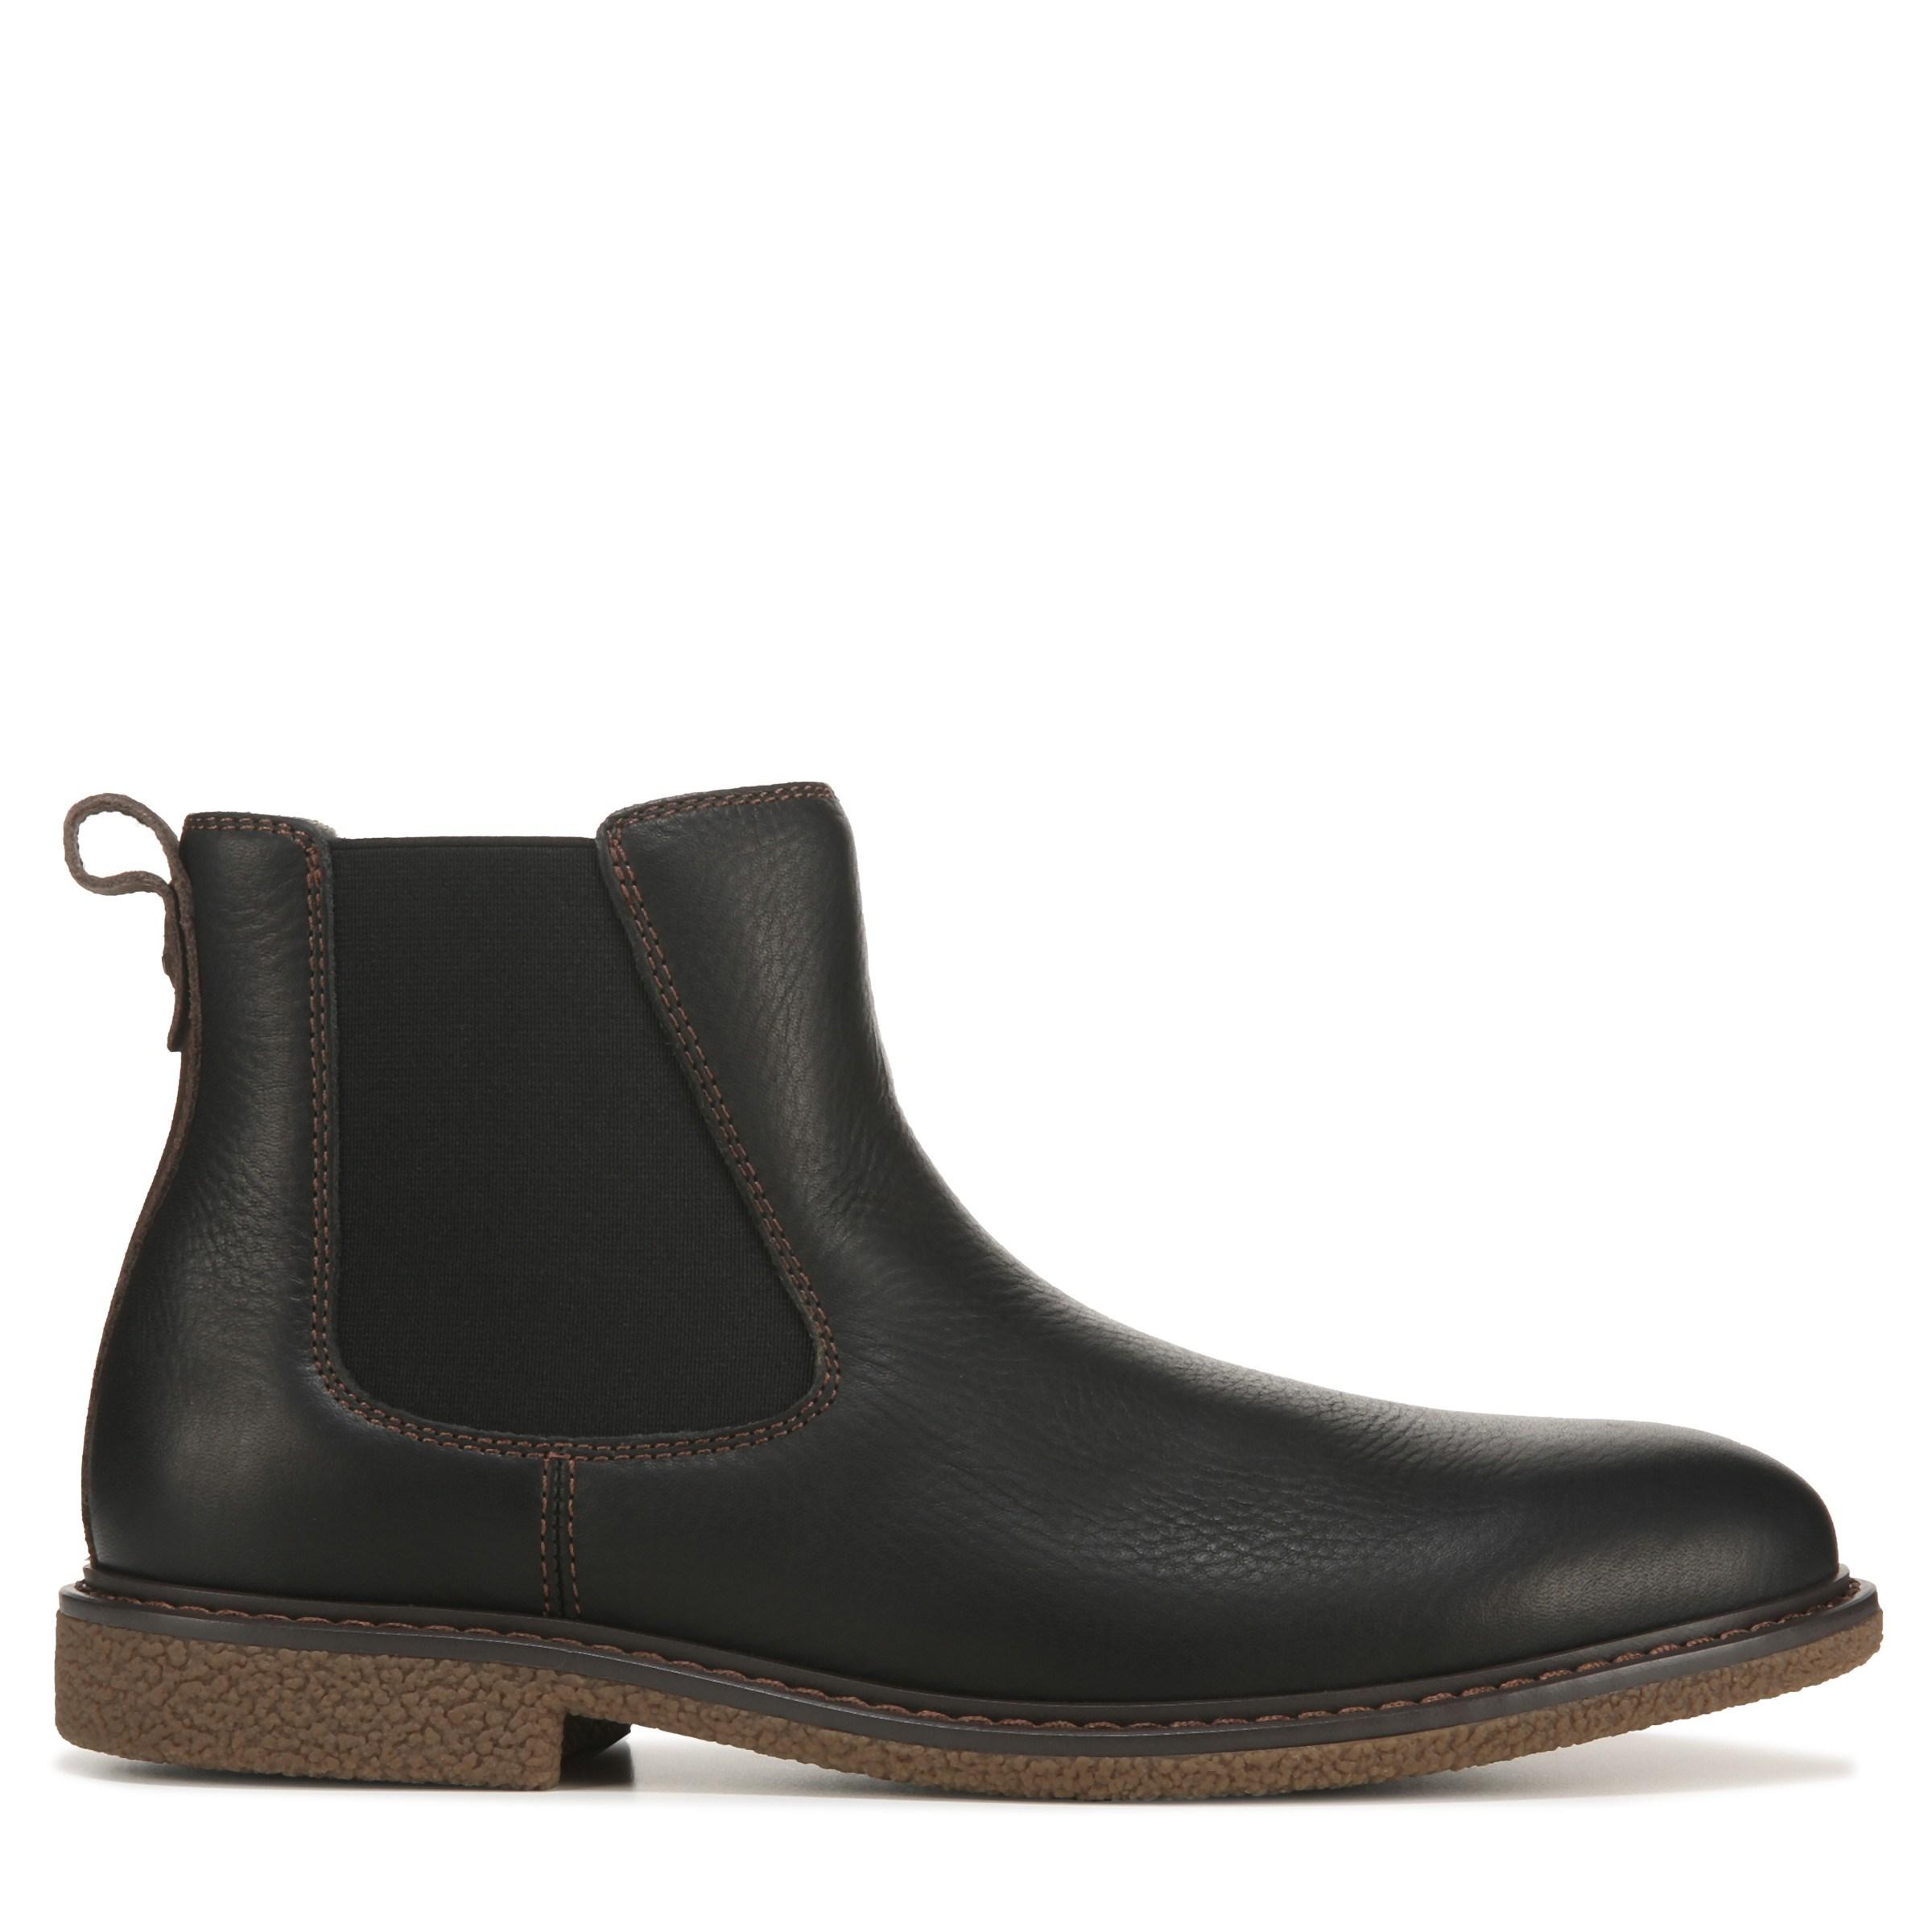 Dockers Grant Leather Chelsea Boots in Black for Men - Lyst